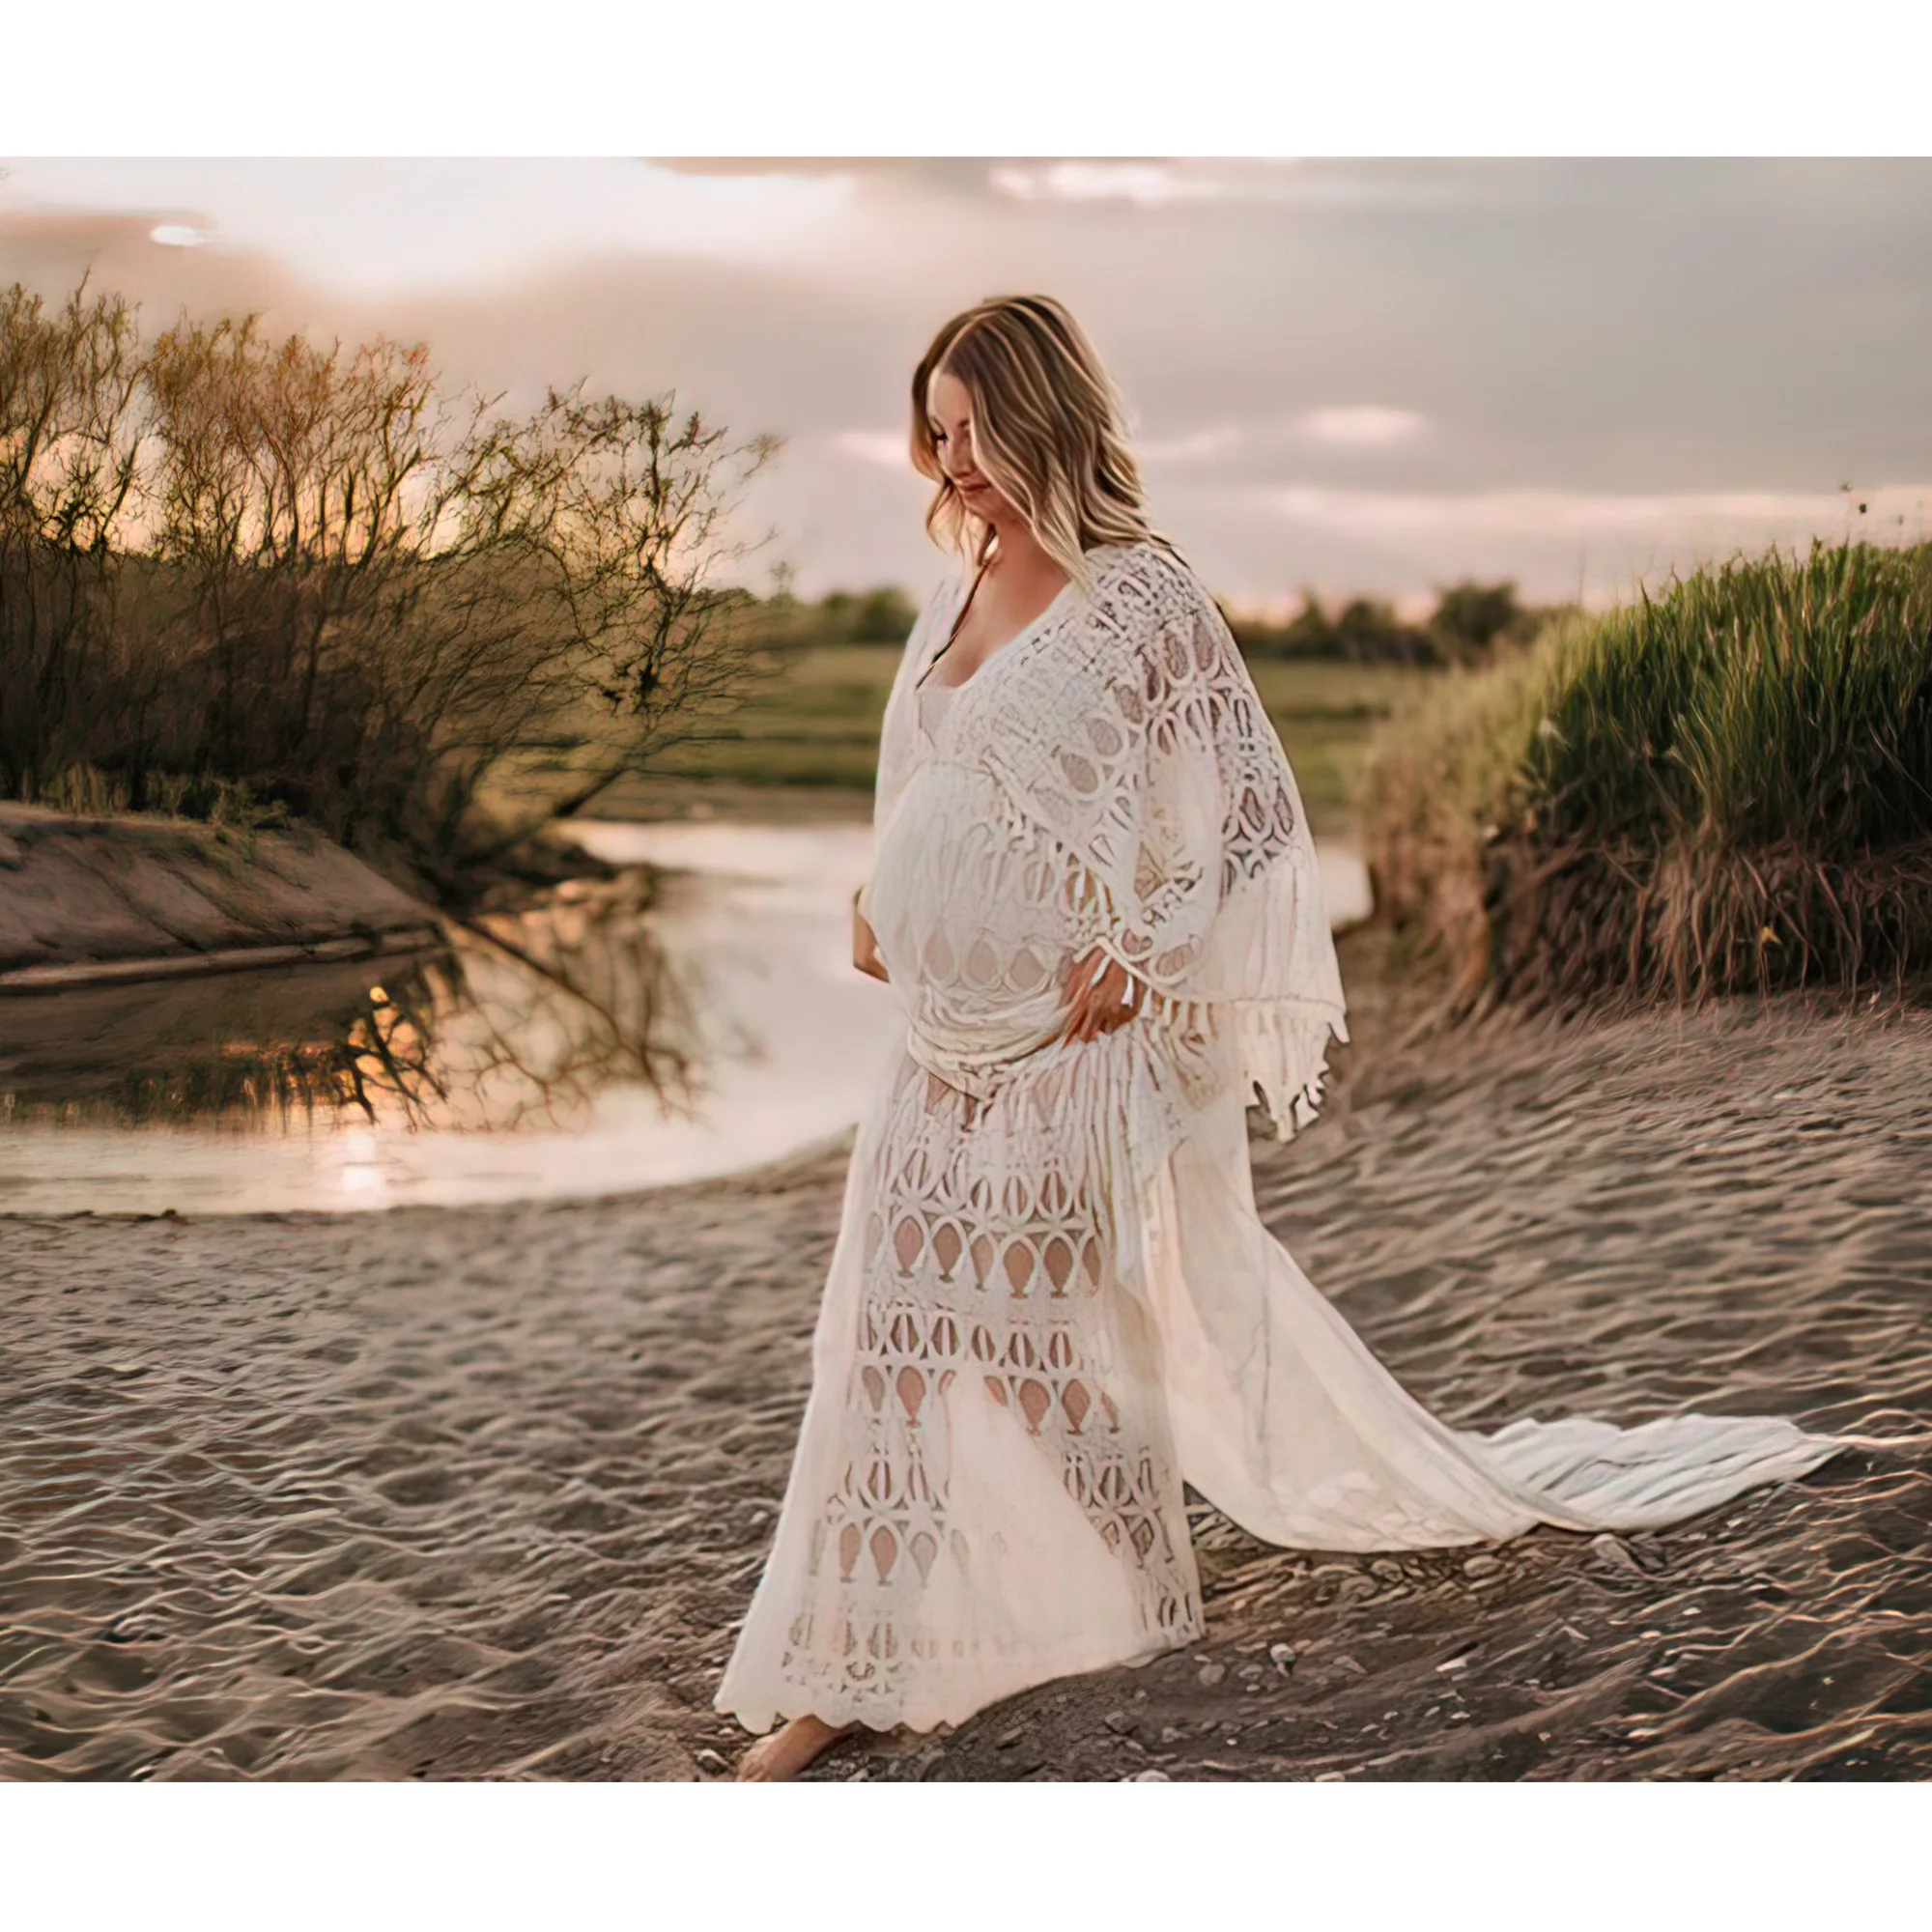 Don&Judy Embroidery Maternity Photography Boho Dress Maxi Long Gown Pregnancy Photo Shoot Woman Clothes Evening Party Costume enlarge